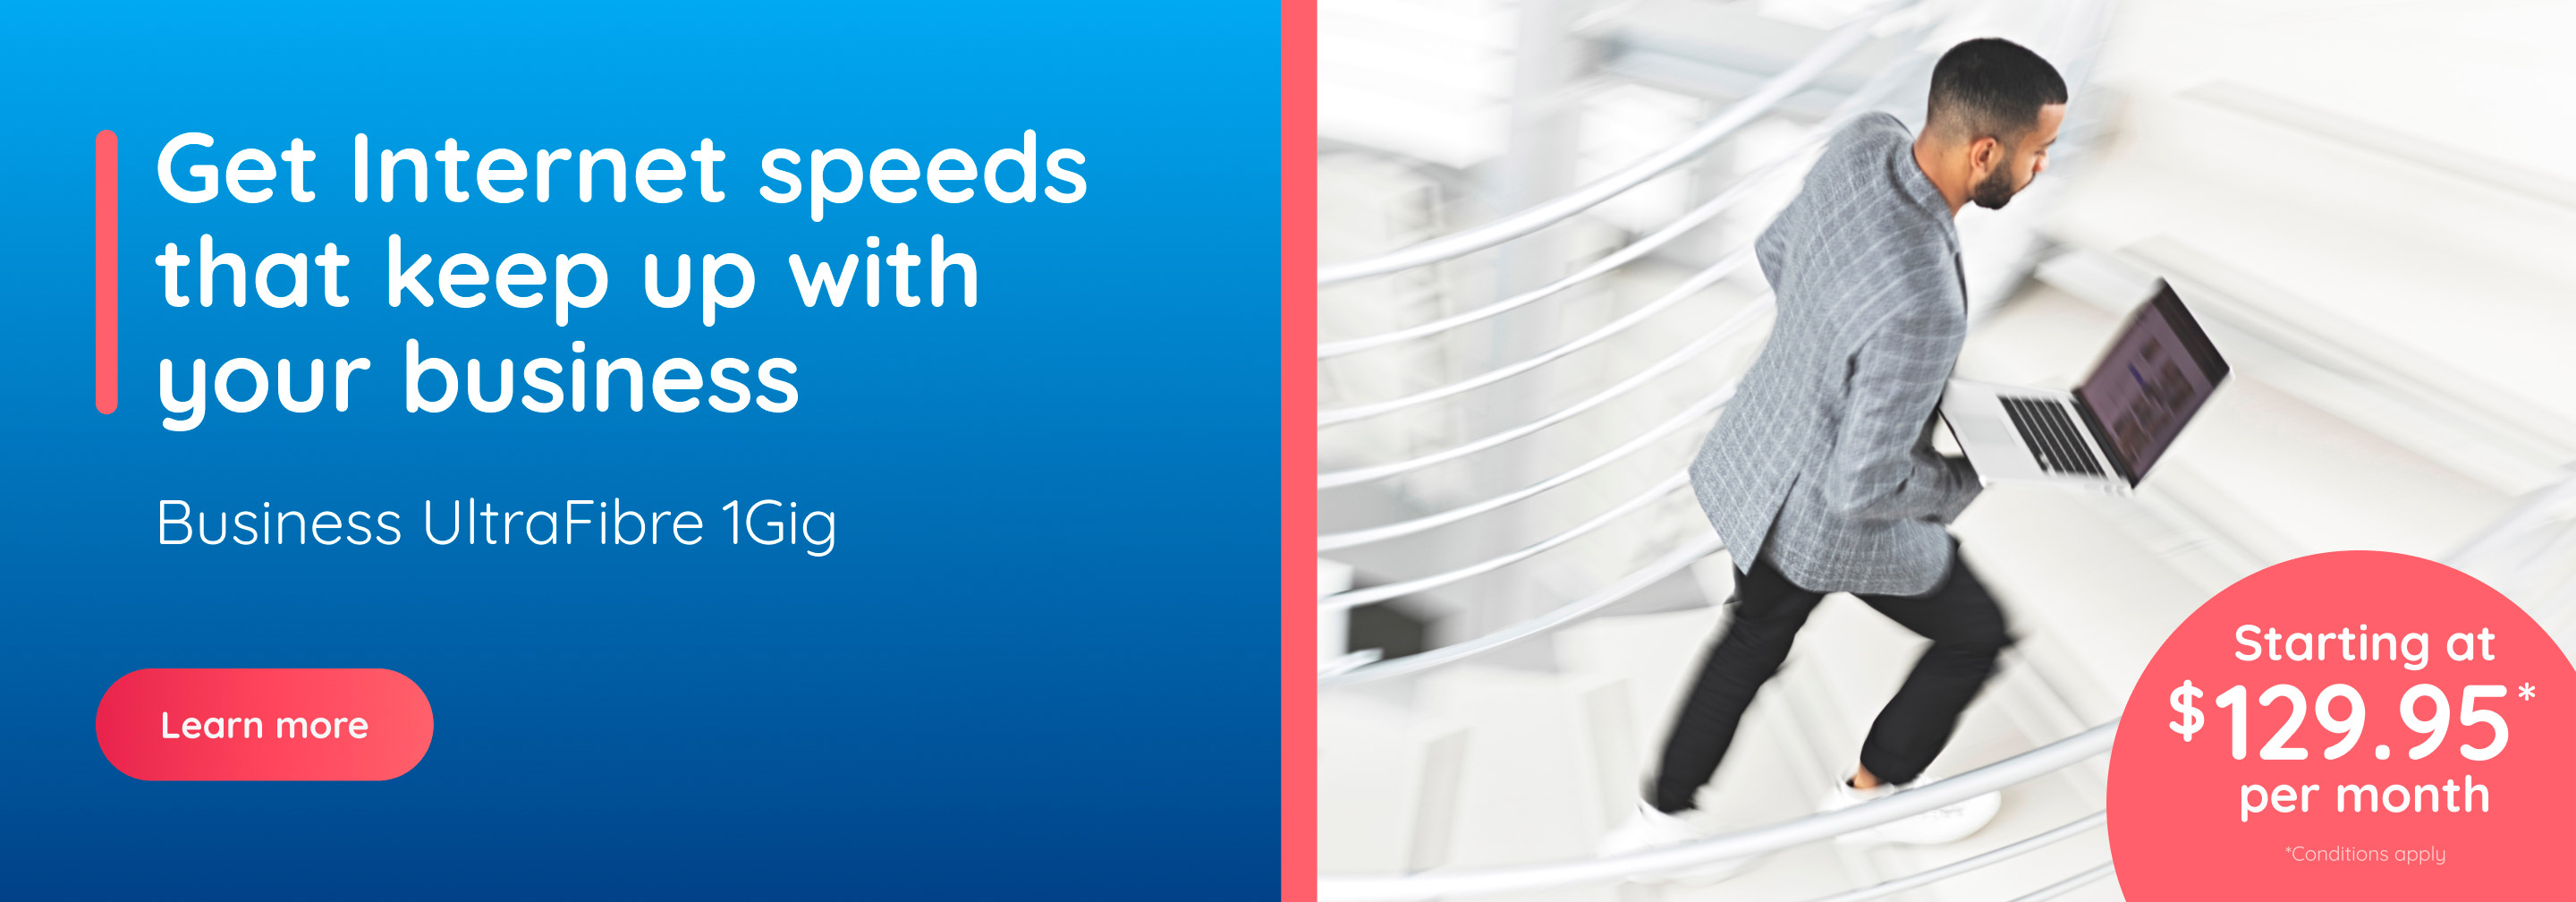 Get Internet speeds that keep up with your business. Business UltraFibre 1Gig.